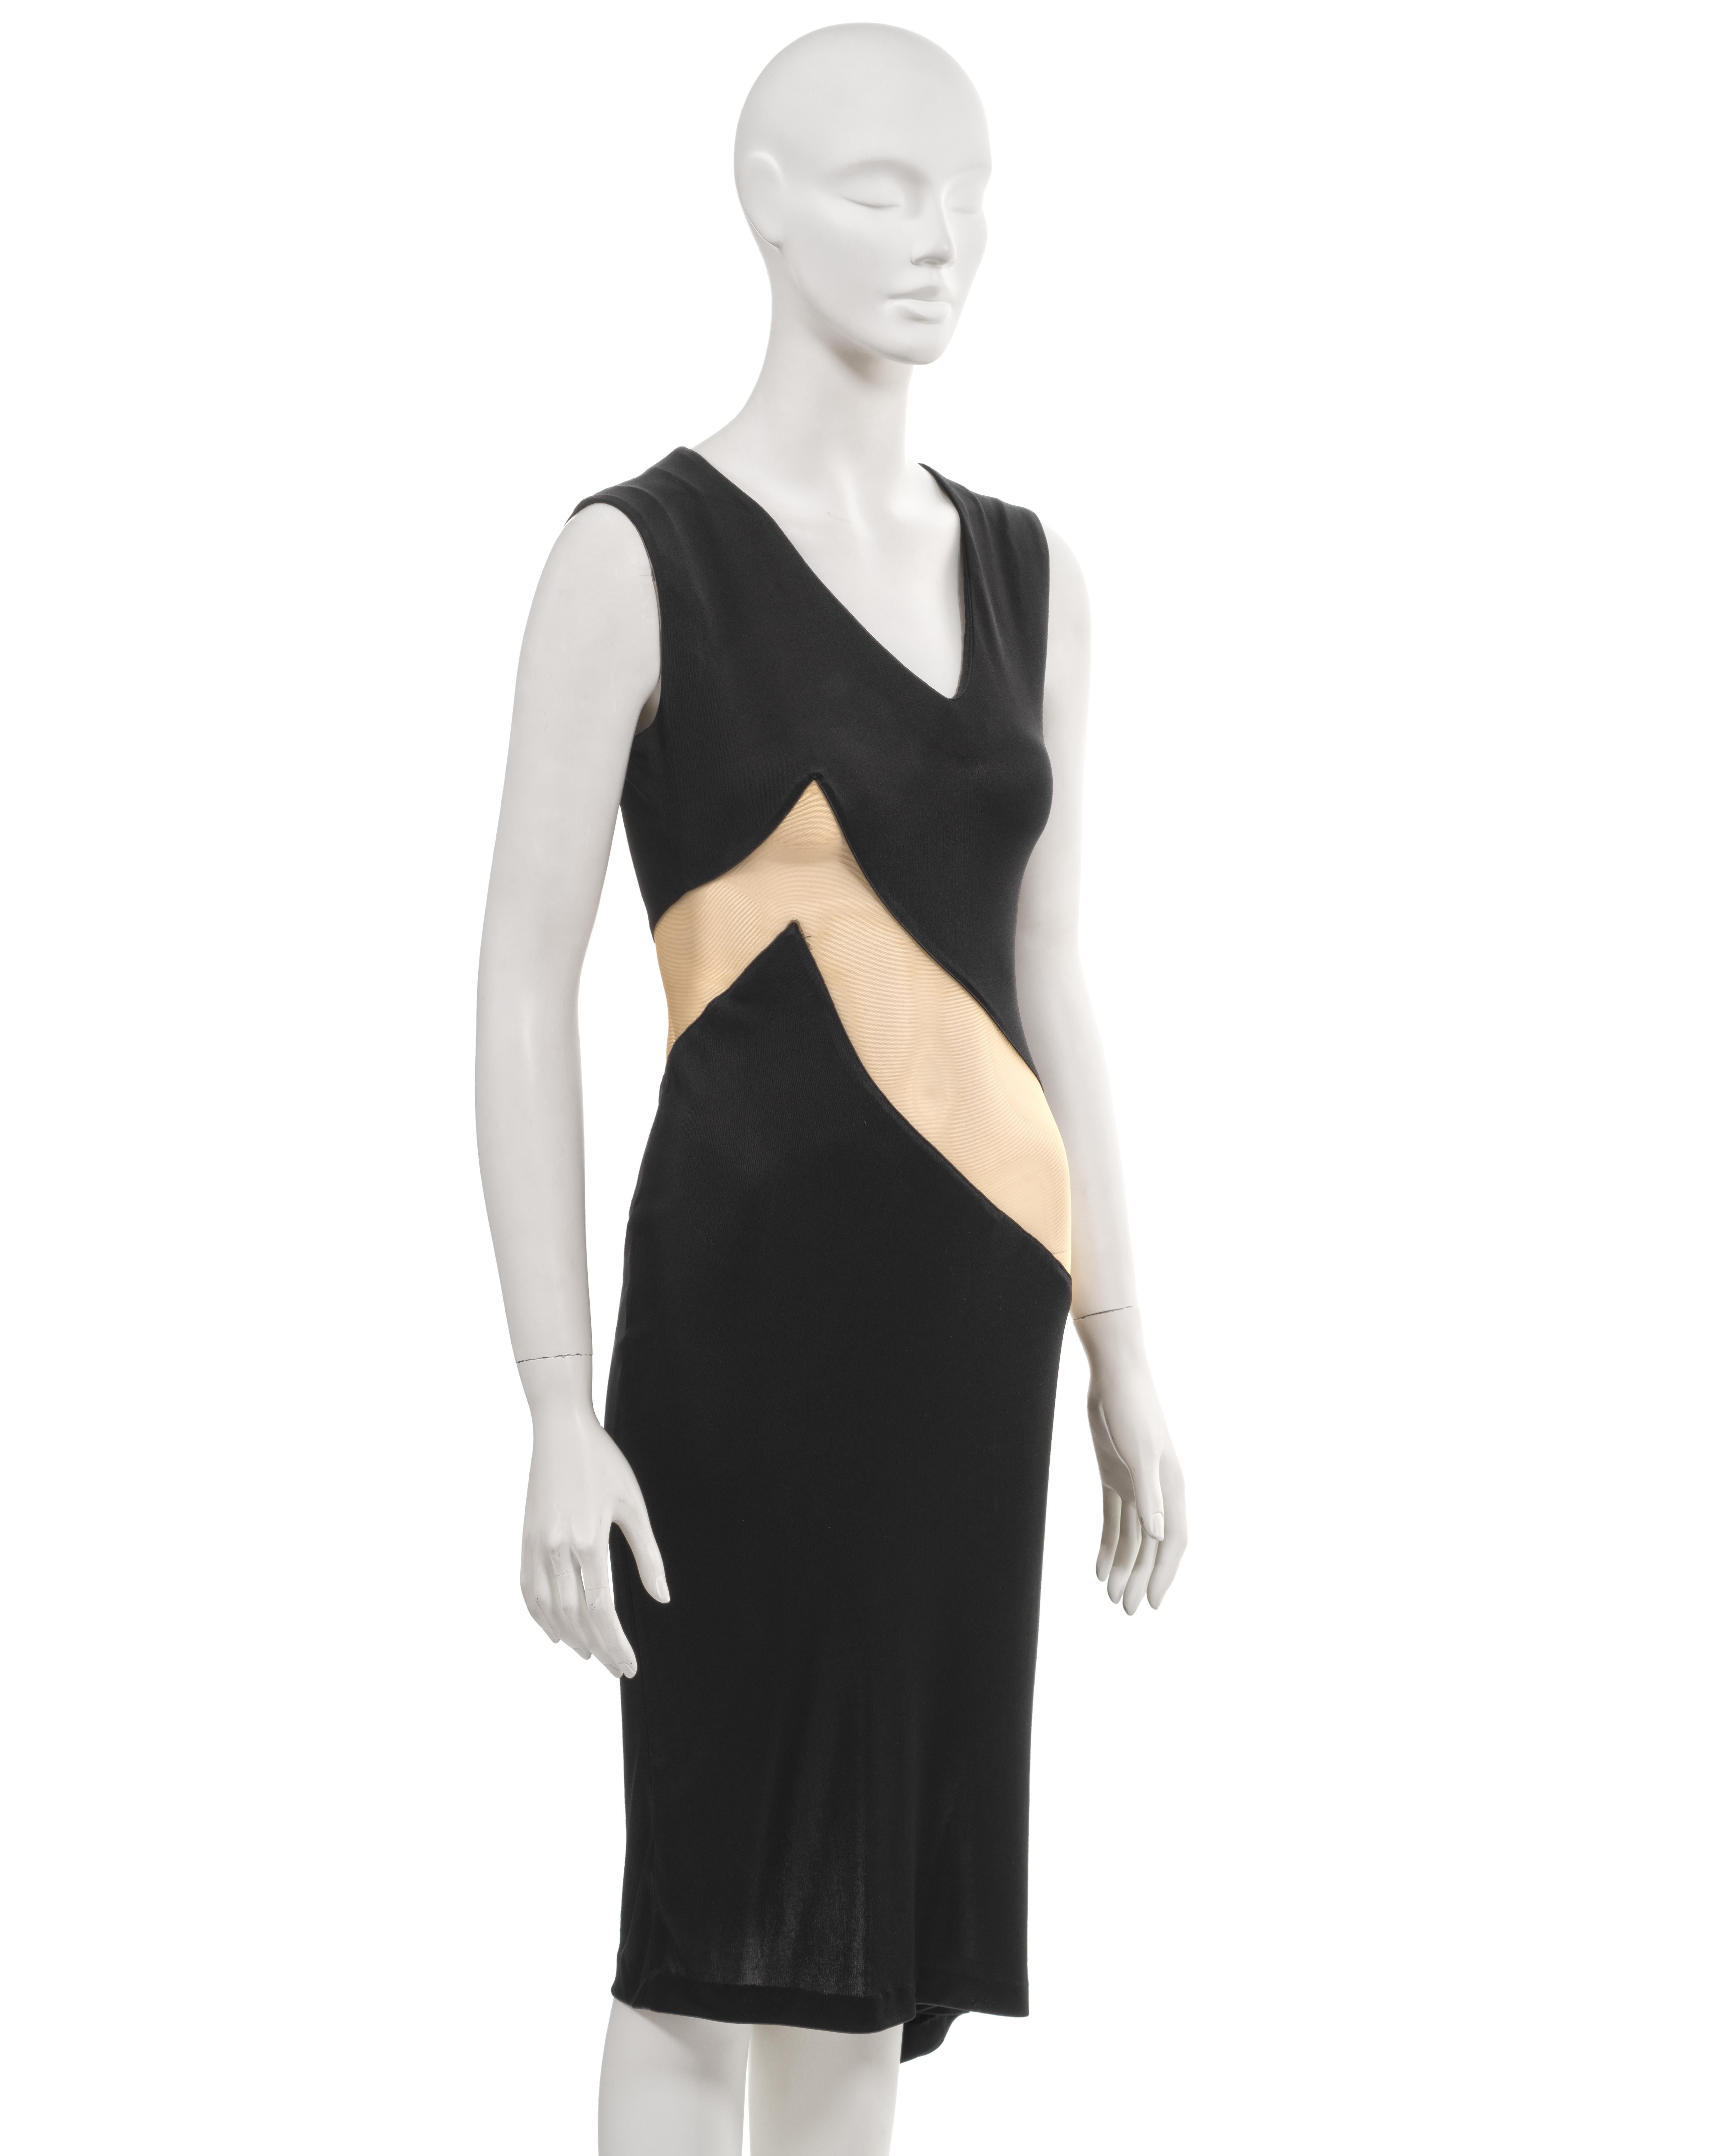 Alexander McQueen black acetate jersey dress with nude mesh insert, ss 1996 For Sale 1